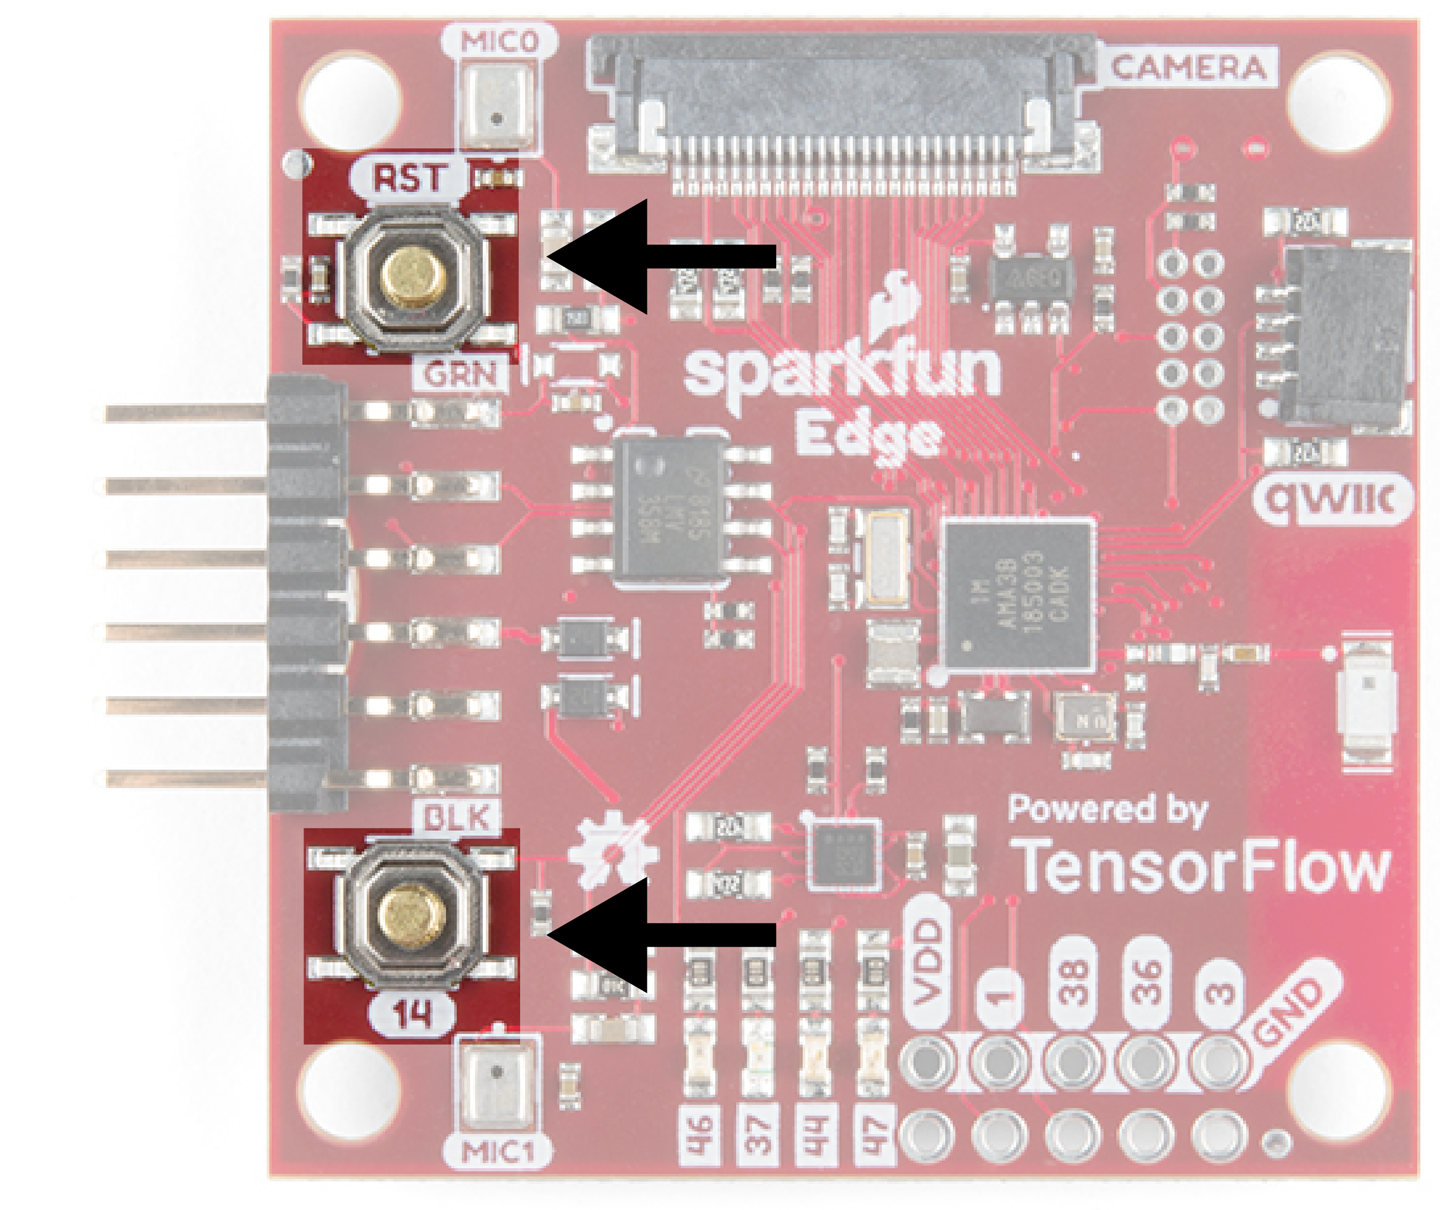 A photo showing the SparkFun Edge's buttons